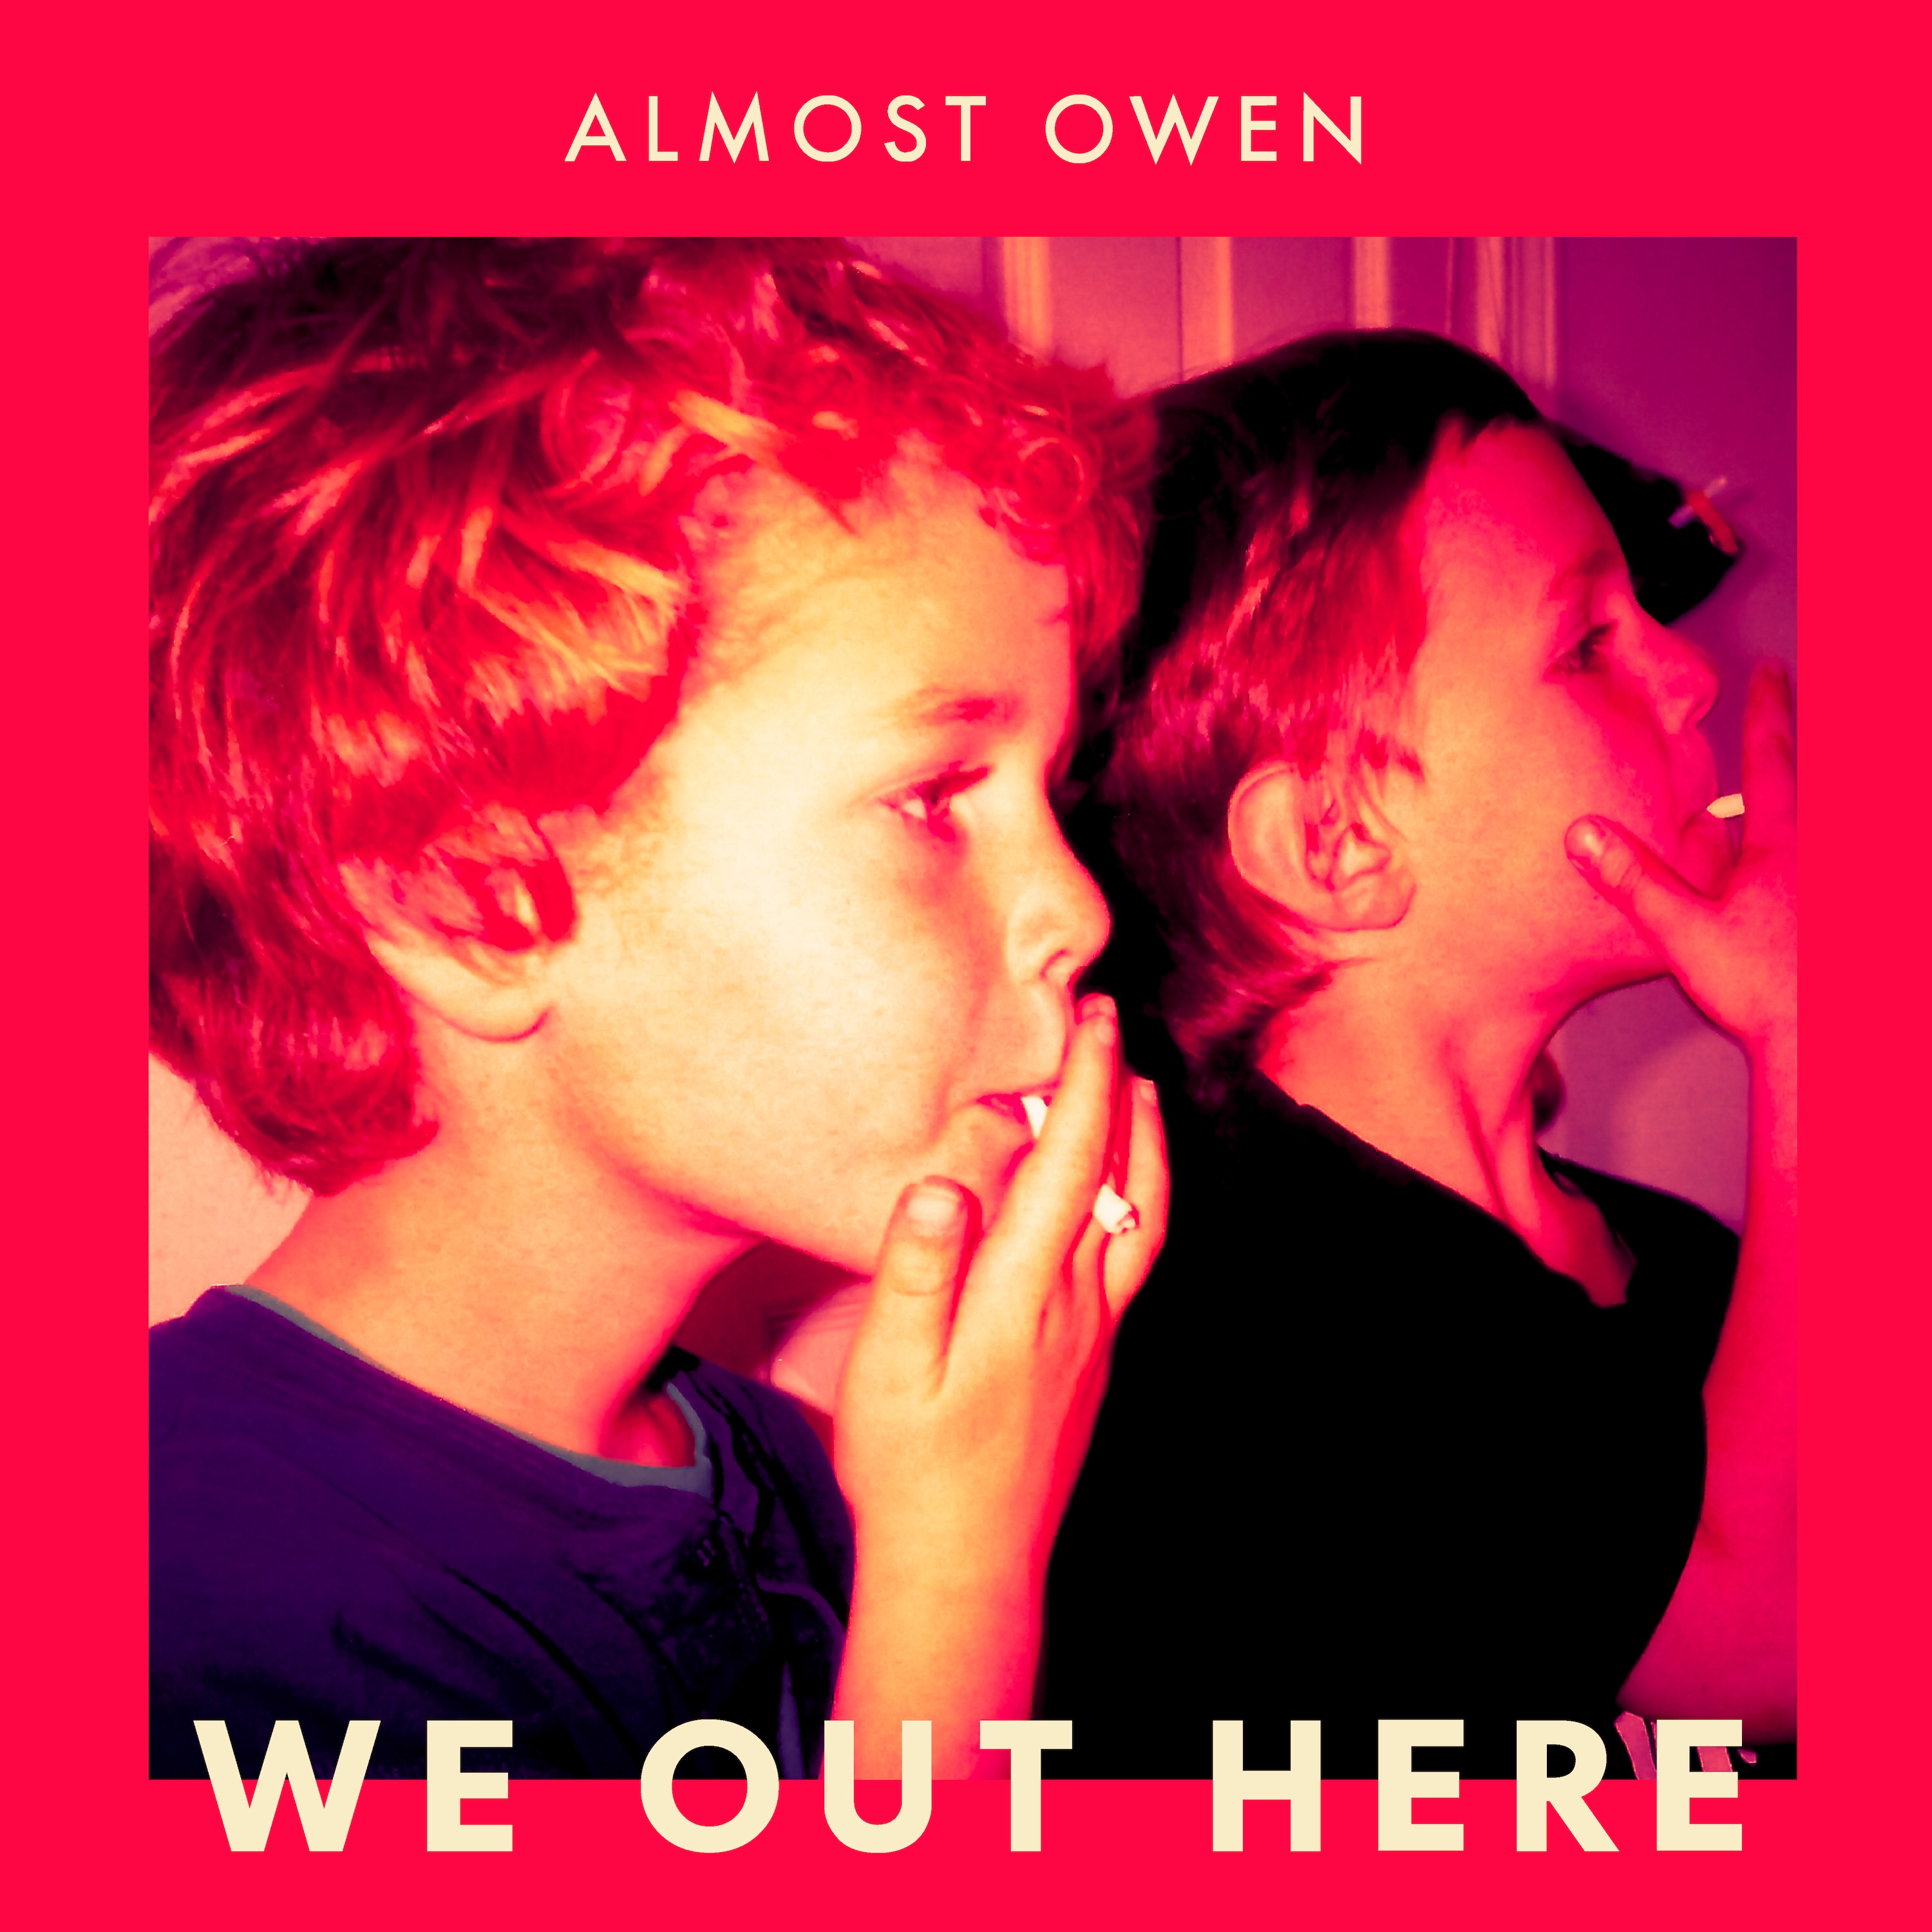 Almost Owen Lives His Best Life (Frugally) In “We Out Here”